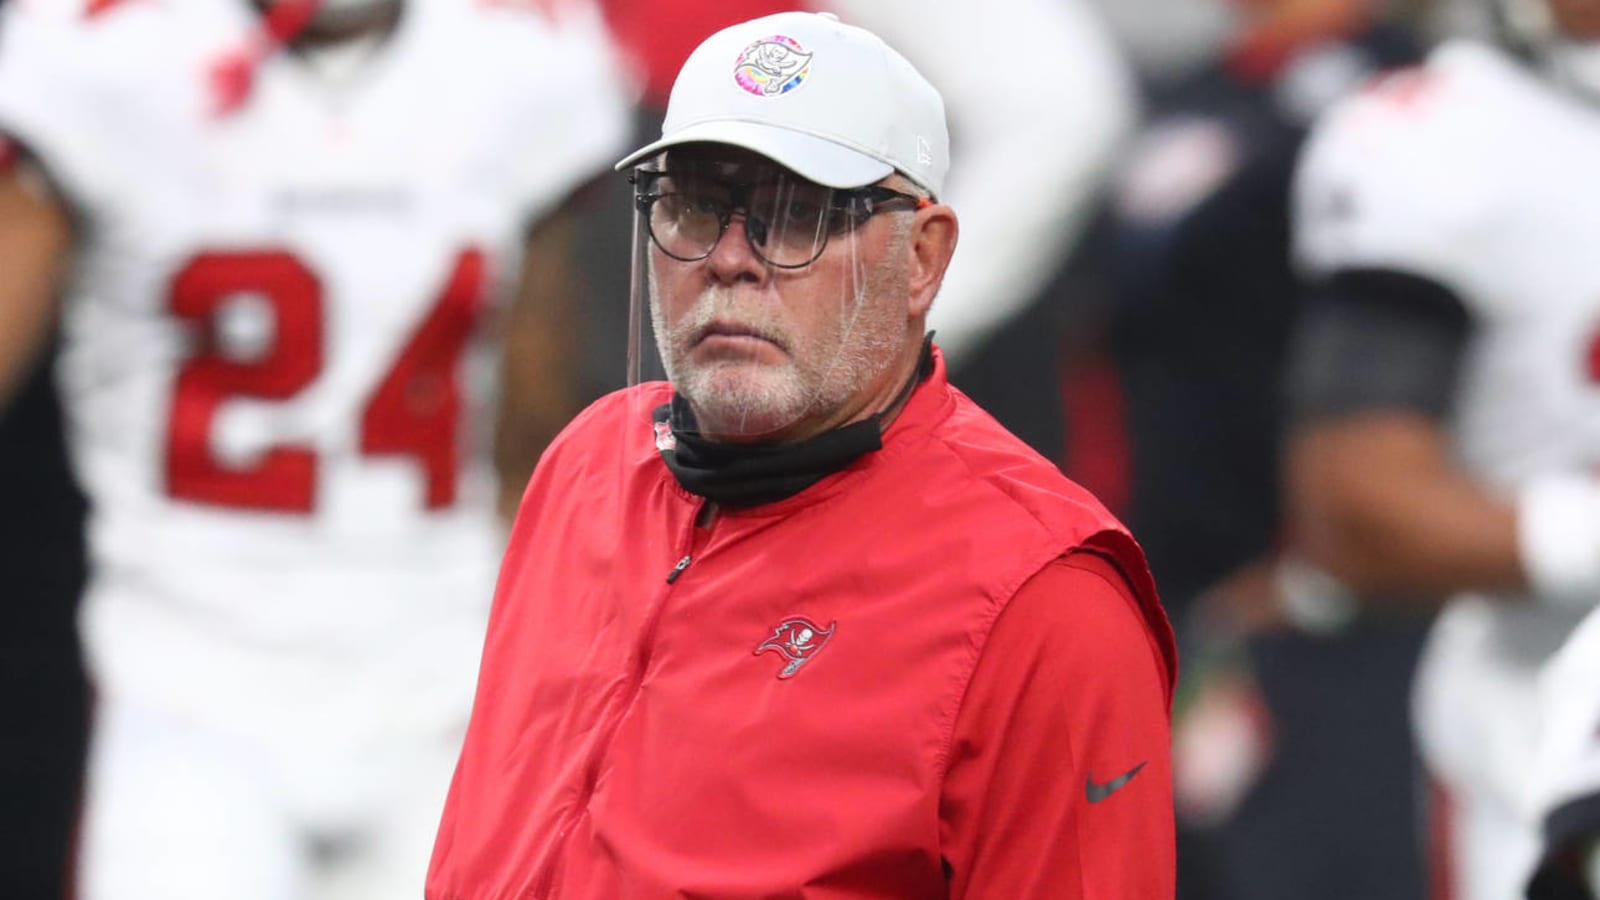 Arians throws shade at Haskins ahead of playoffs